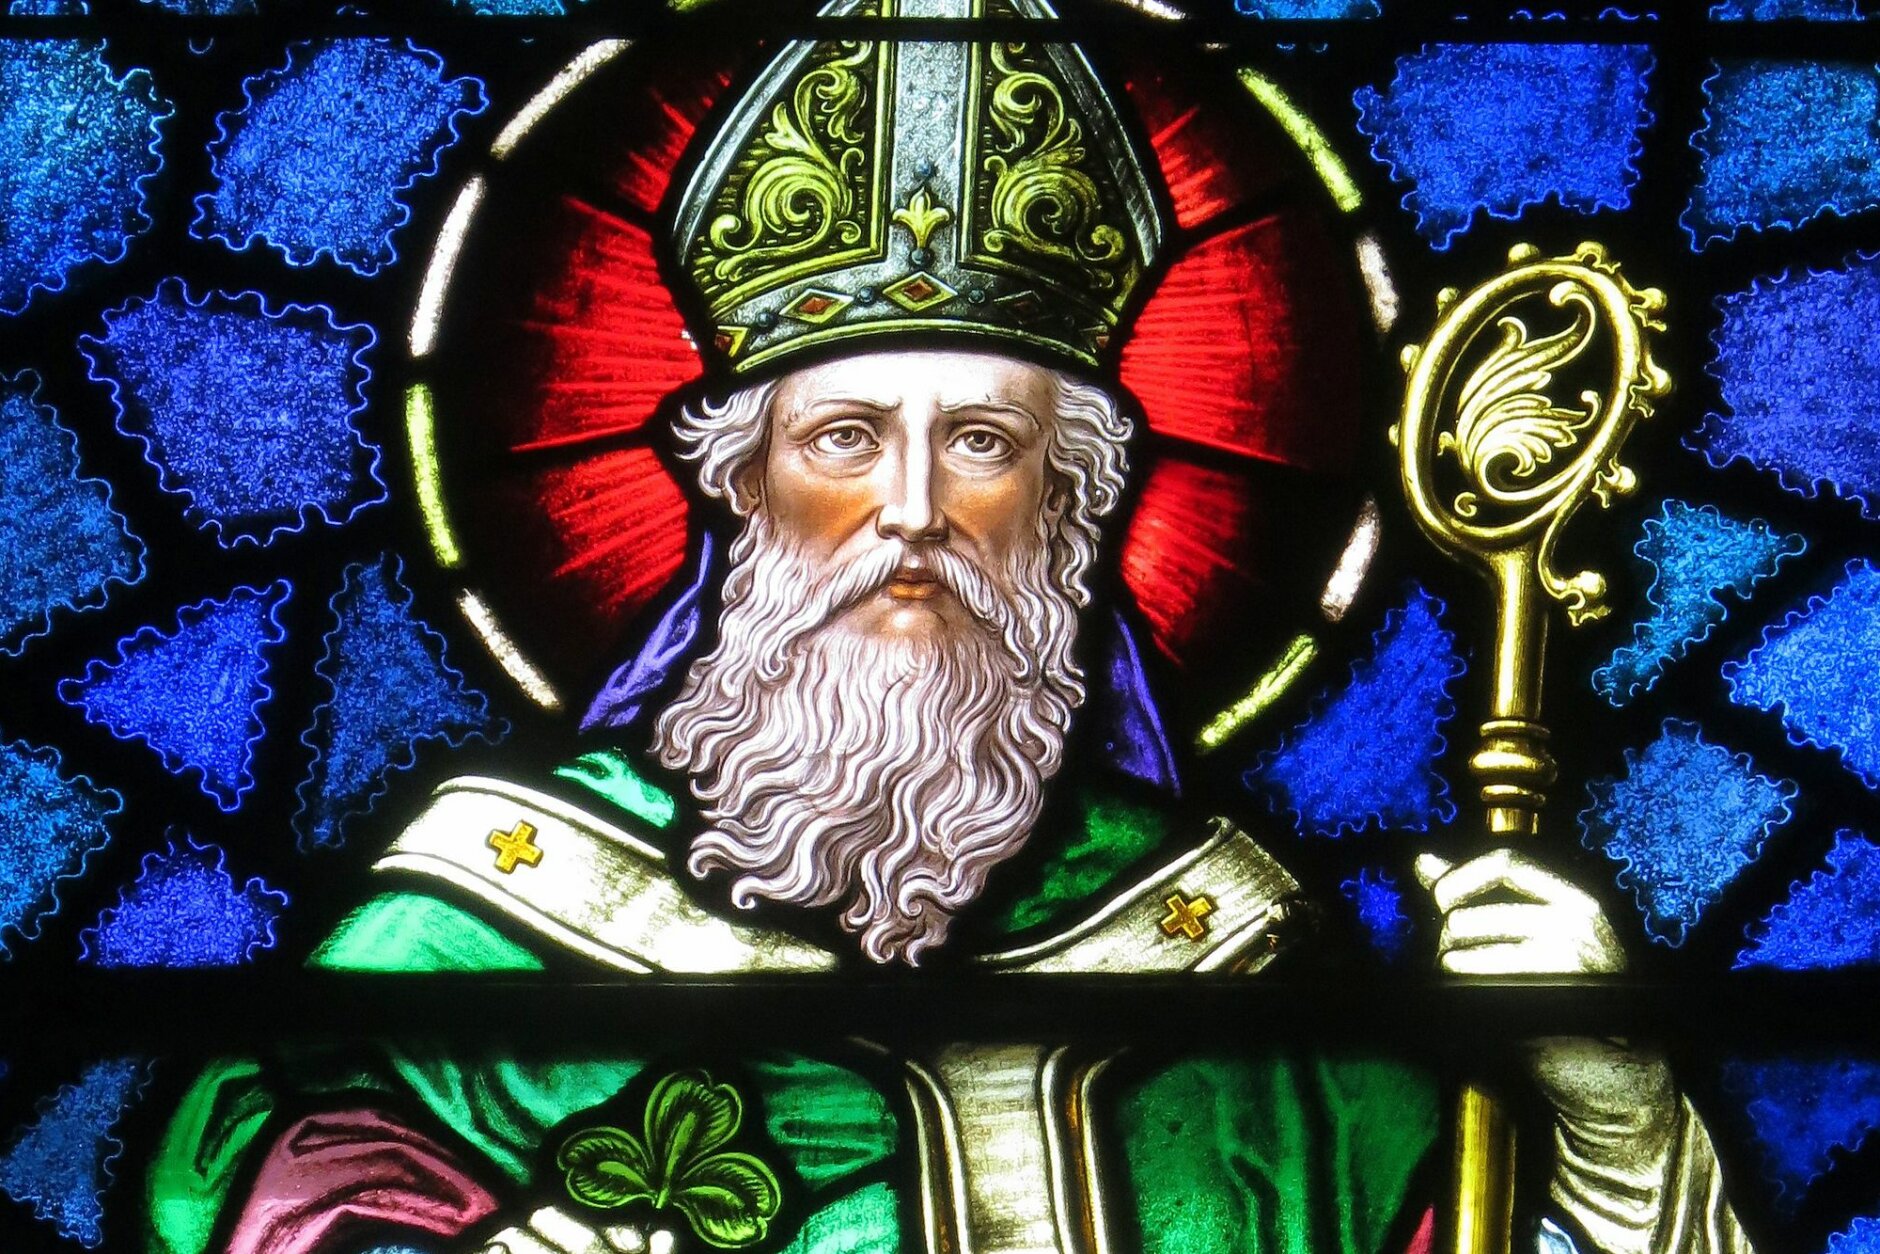 <p><strong>Who was St. Patrick?</strong></p>
<p>He’s the patron saint of Ireland. His birth and death dates aren’t precisely known, but he was allegedly active in the second half of the fifth century.</p>
<p>He was born in Britain; he was kidnapped at about 16 and brought to Ireland as a slave. He lived and worked there for about six years before he escaped. As a priest, he went back to the Emerald Isle, and is known as the man who brought Christianity to the country. (He’s also credited with driving the snakes out of Ireland, which is probably a metaphor since no one has seen any indication that there ever were snakes in Ireland anyway.)</p>
<p>March 17 is his feast day, the day he’s reported to have died. It’s not a Holy Day of Obligation among Catholics worldwide, but it is in Ireland.</p>
